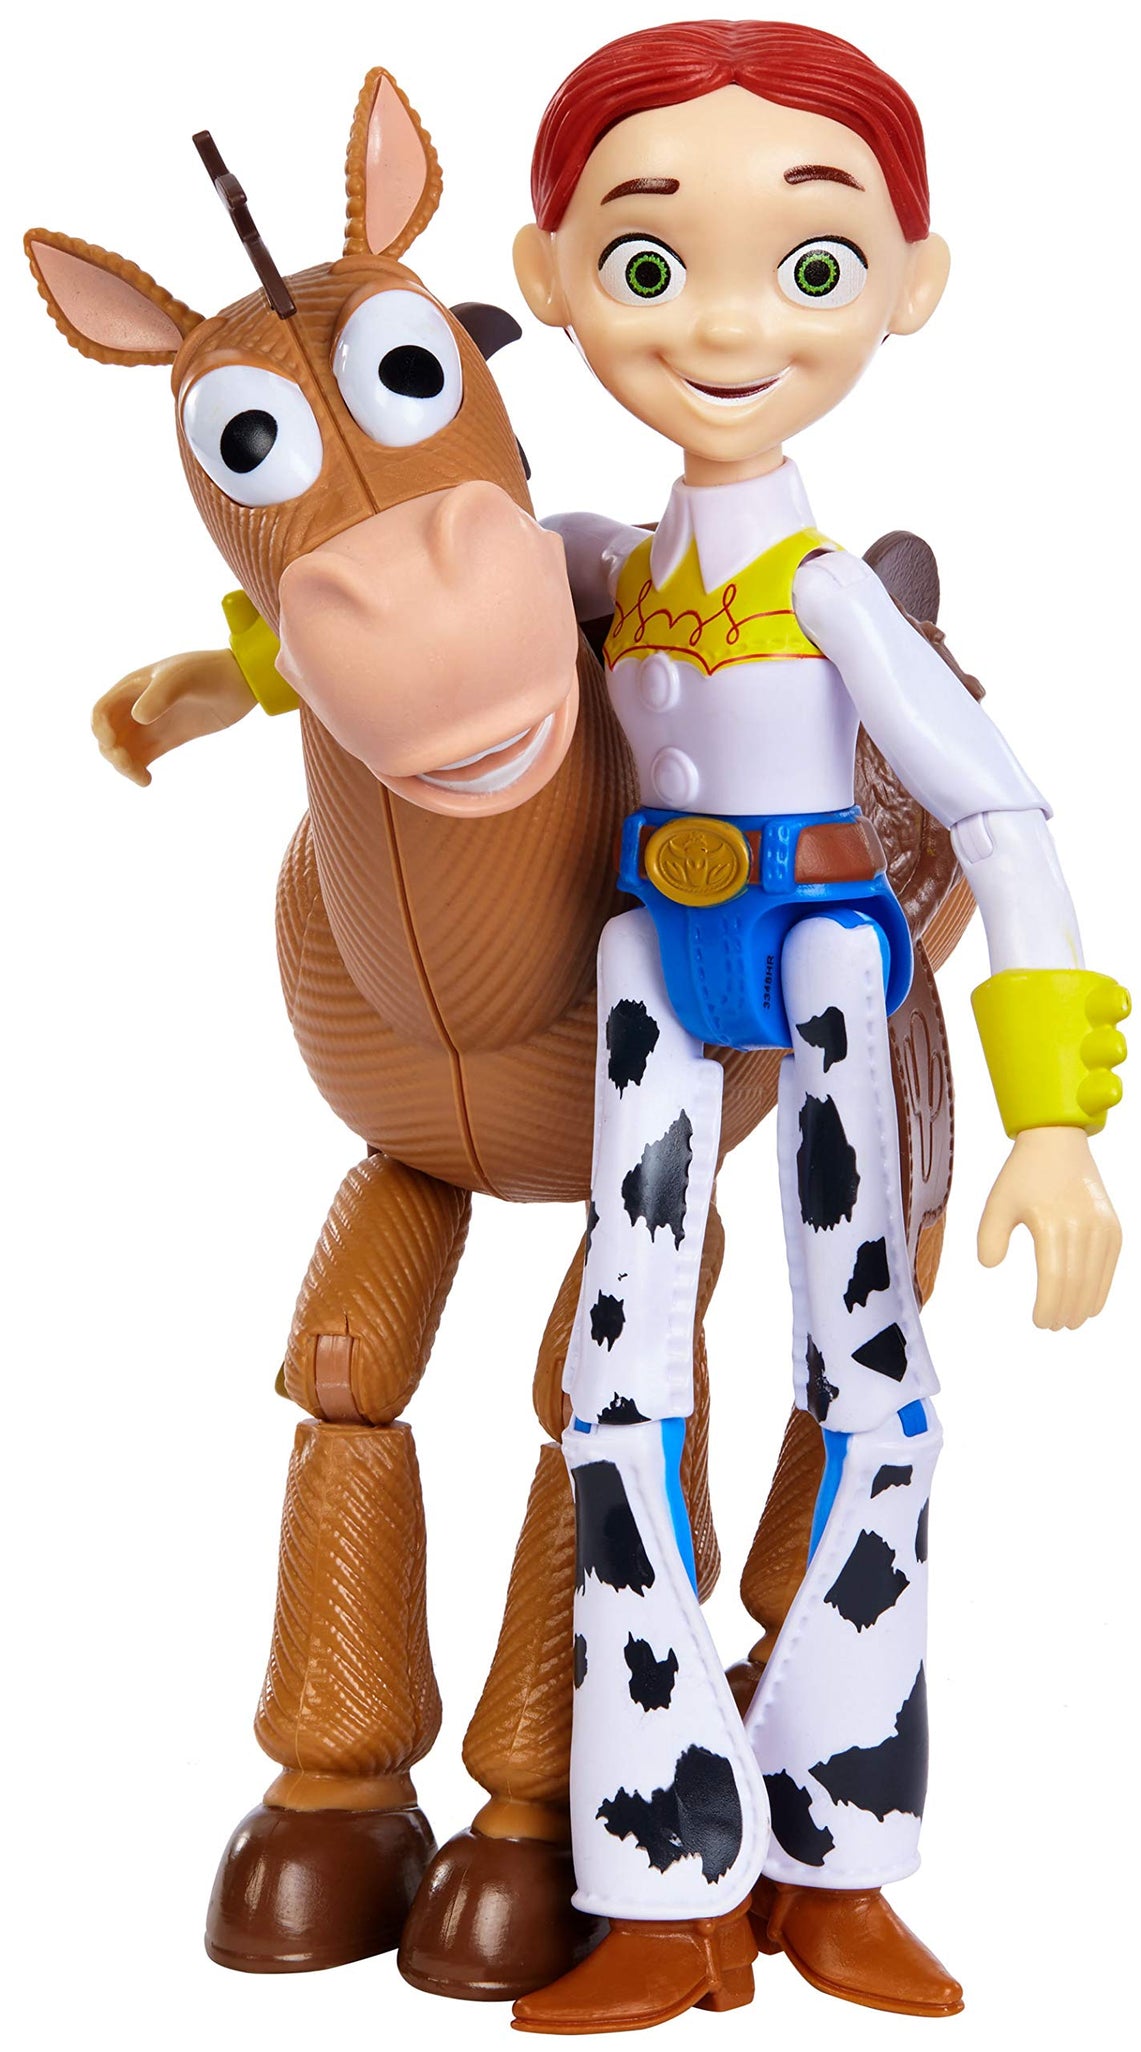 Disney and Pixar Toy Story Jessie and Bullseye 2-Pack Character Figures in True to Movie Scale, Posable with Signature Expressions for Storytelling and Adventure Play, Child's Gift Ages 3 and Up